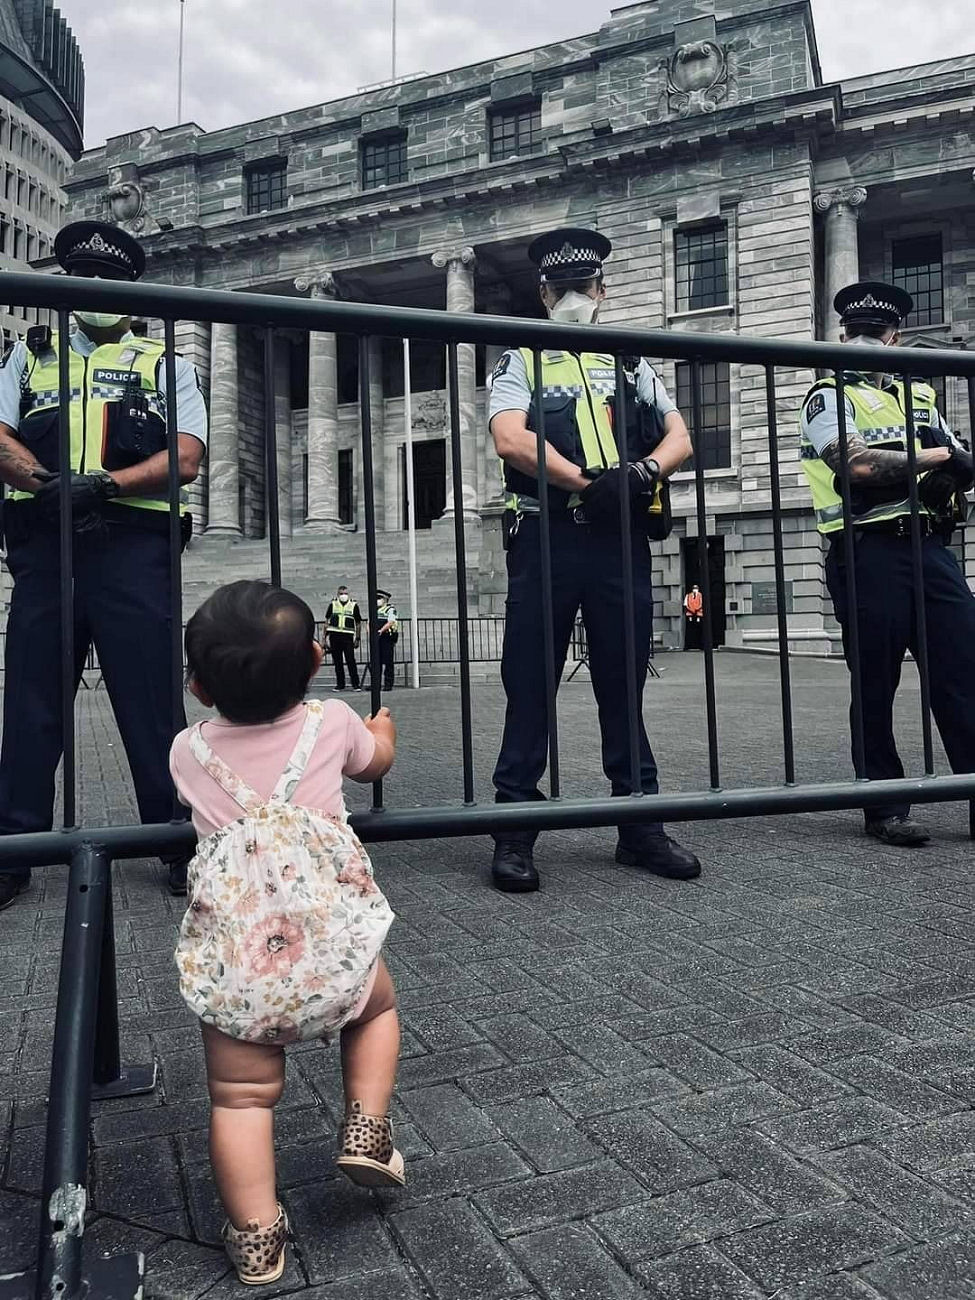 WELLINGTON UPDATE - Brutish Police / thugs at New Zealand Parliament look at innocent child through the barrier